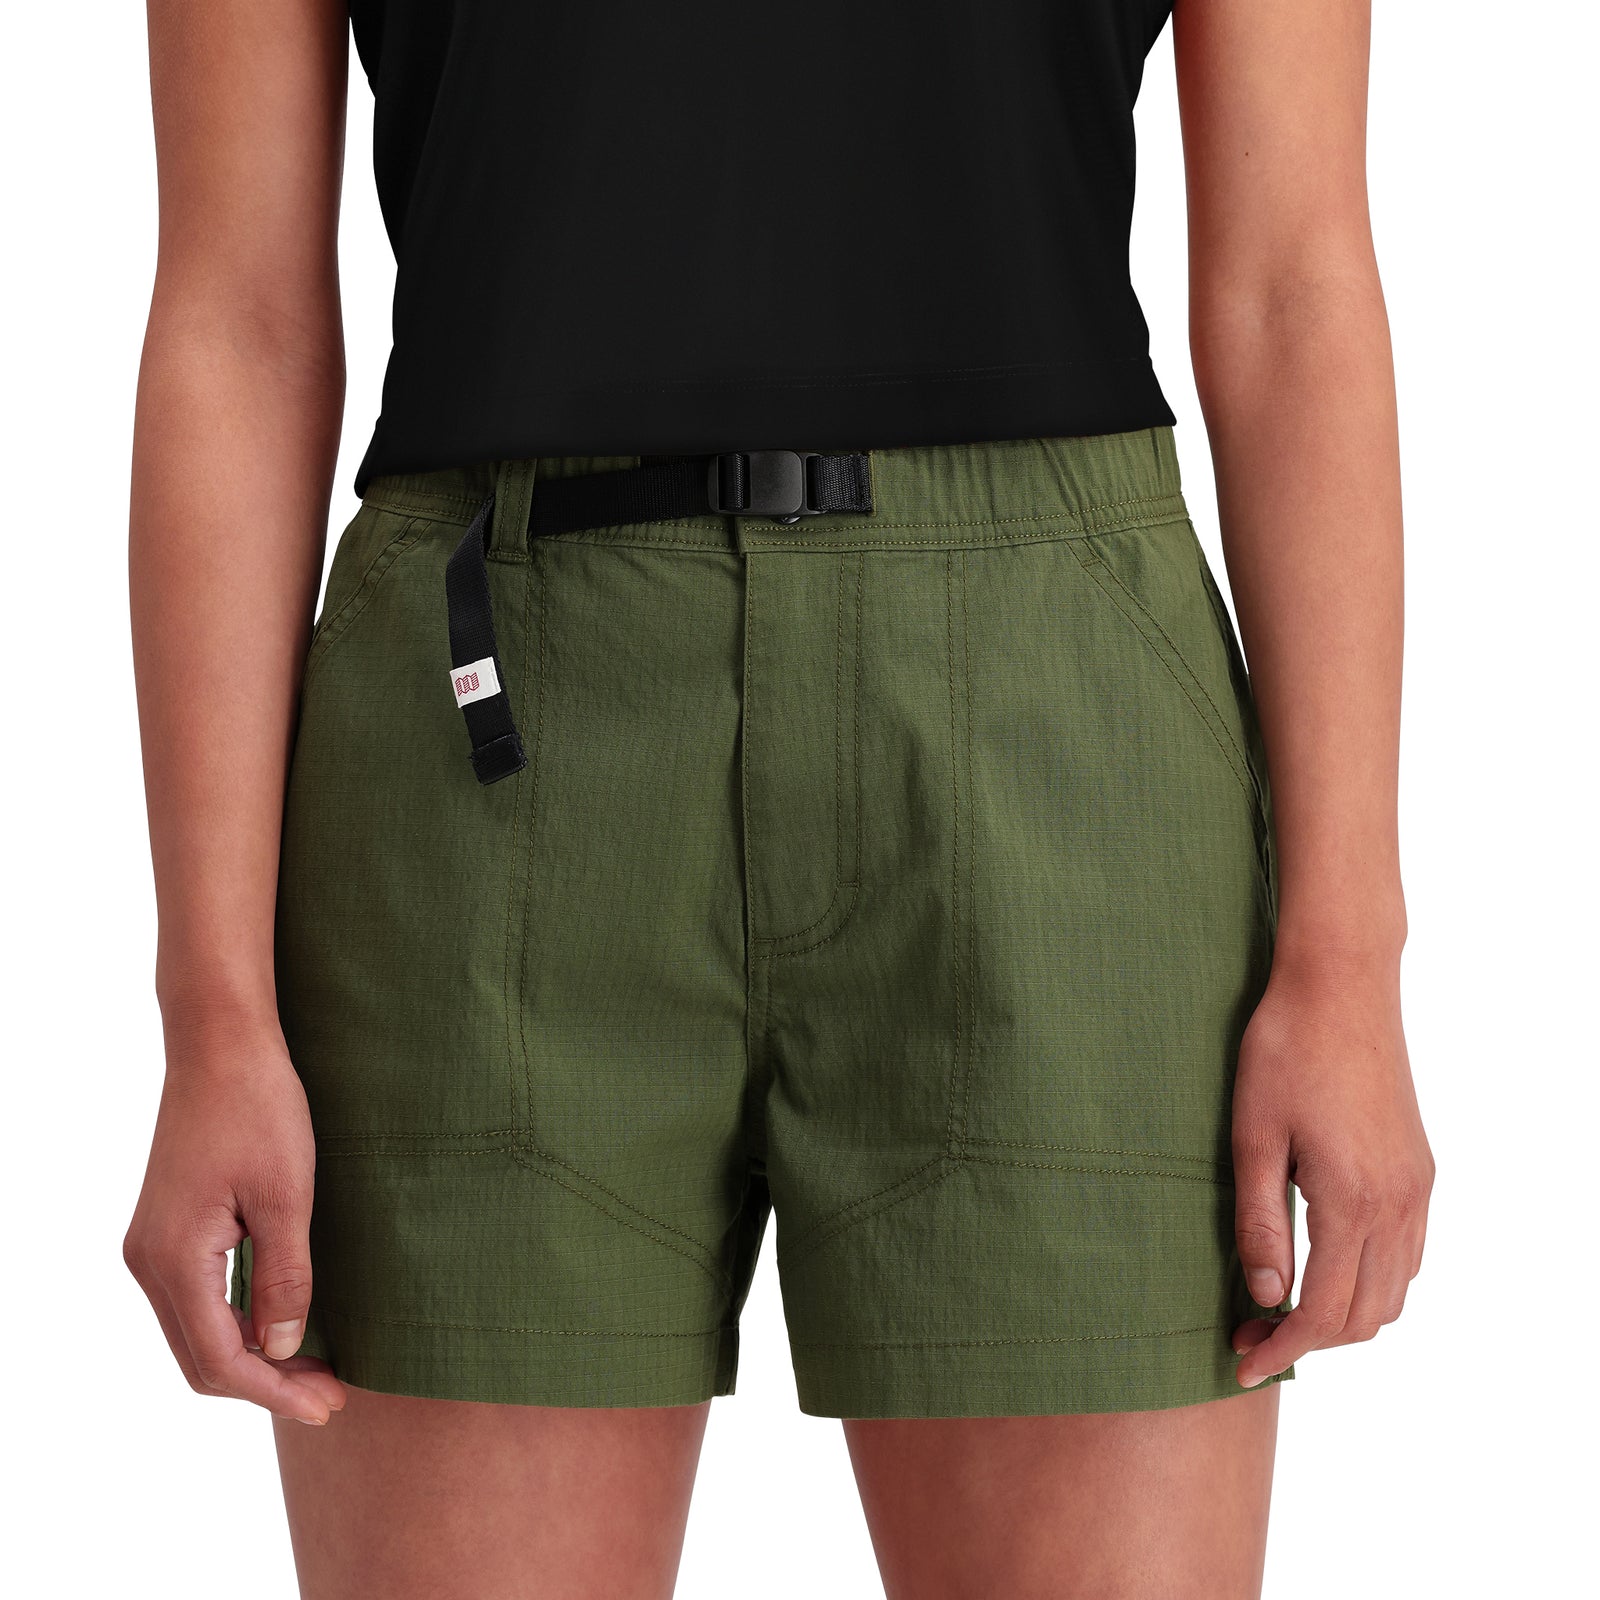 Detail shot of Topo Designs Mountain Short Ripstop - Women's in "Olive"